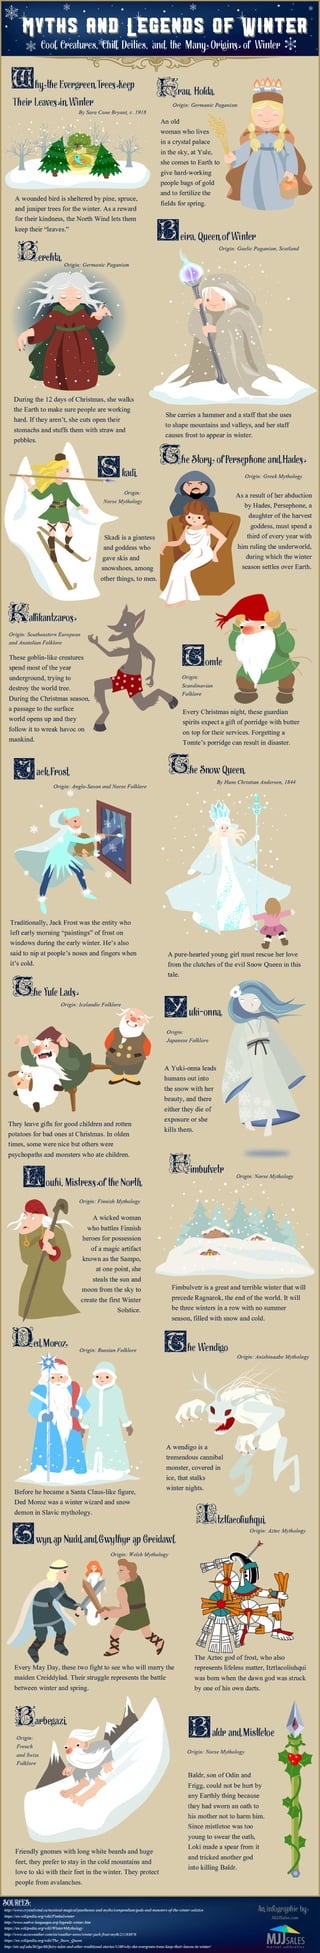 Myths and Legends of Winter